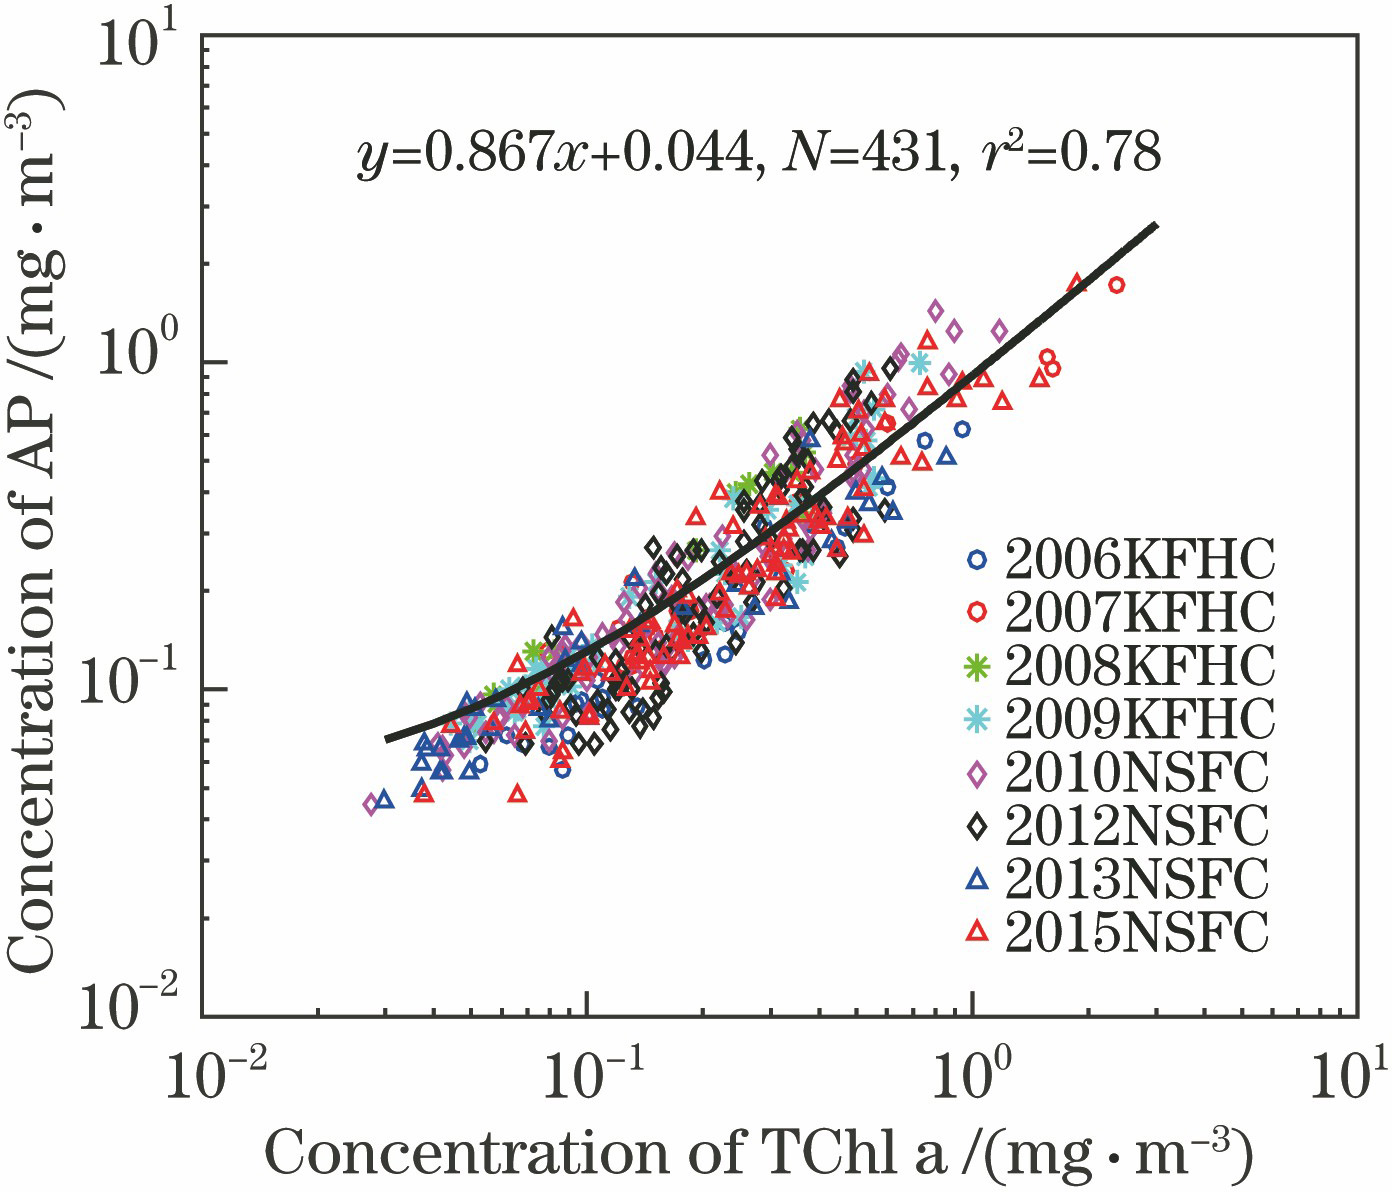 Regression relationship between concentration of TChl a and concentration of accessory pigments (AP)